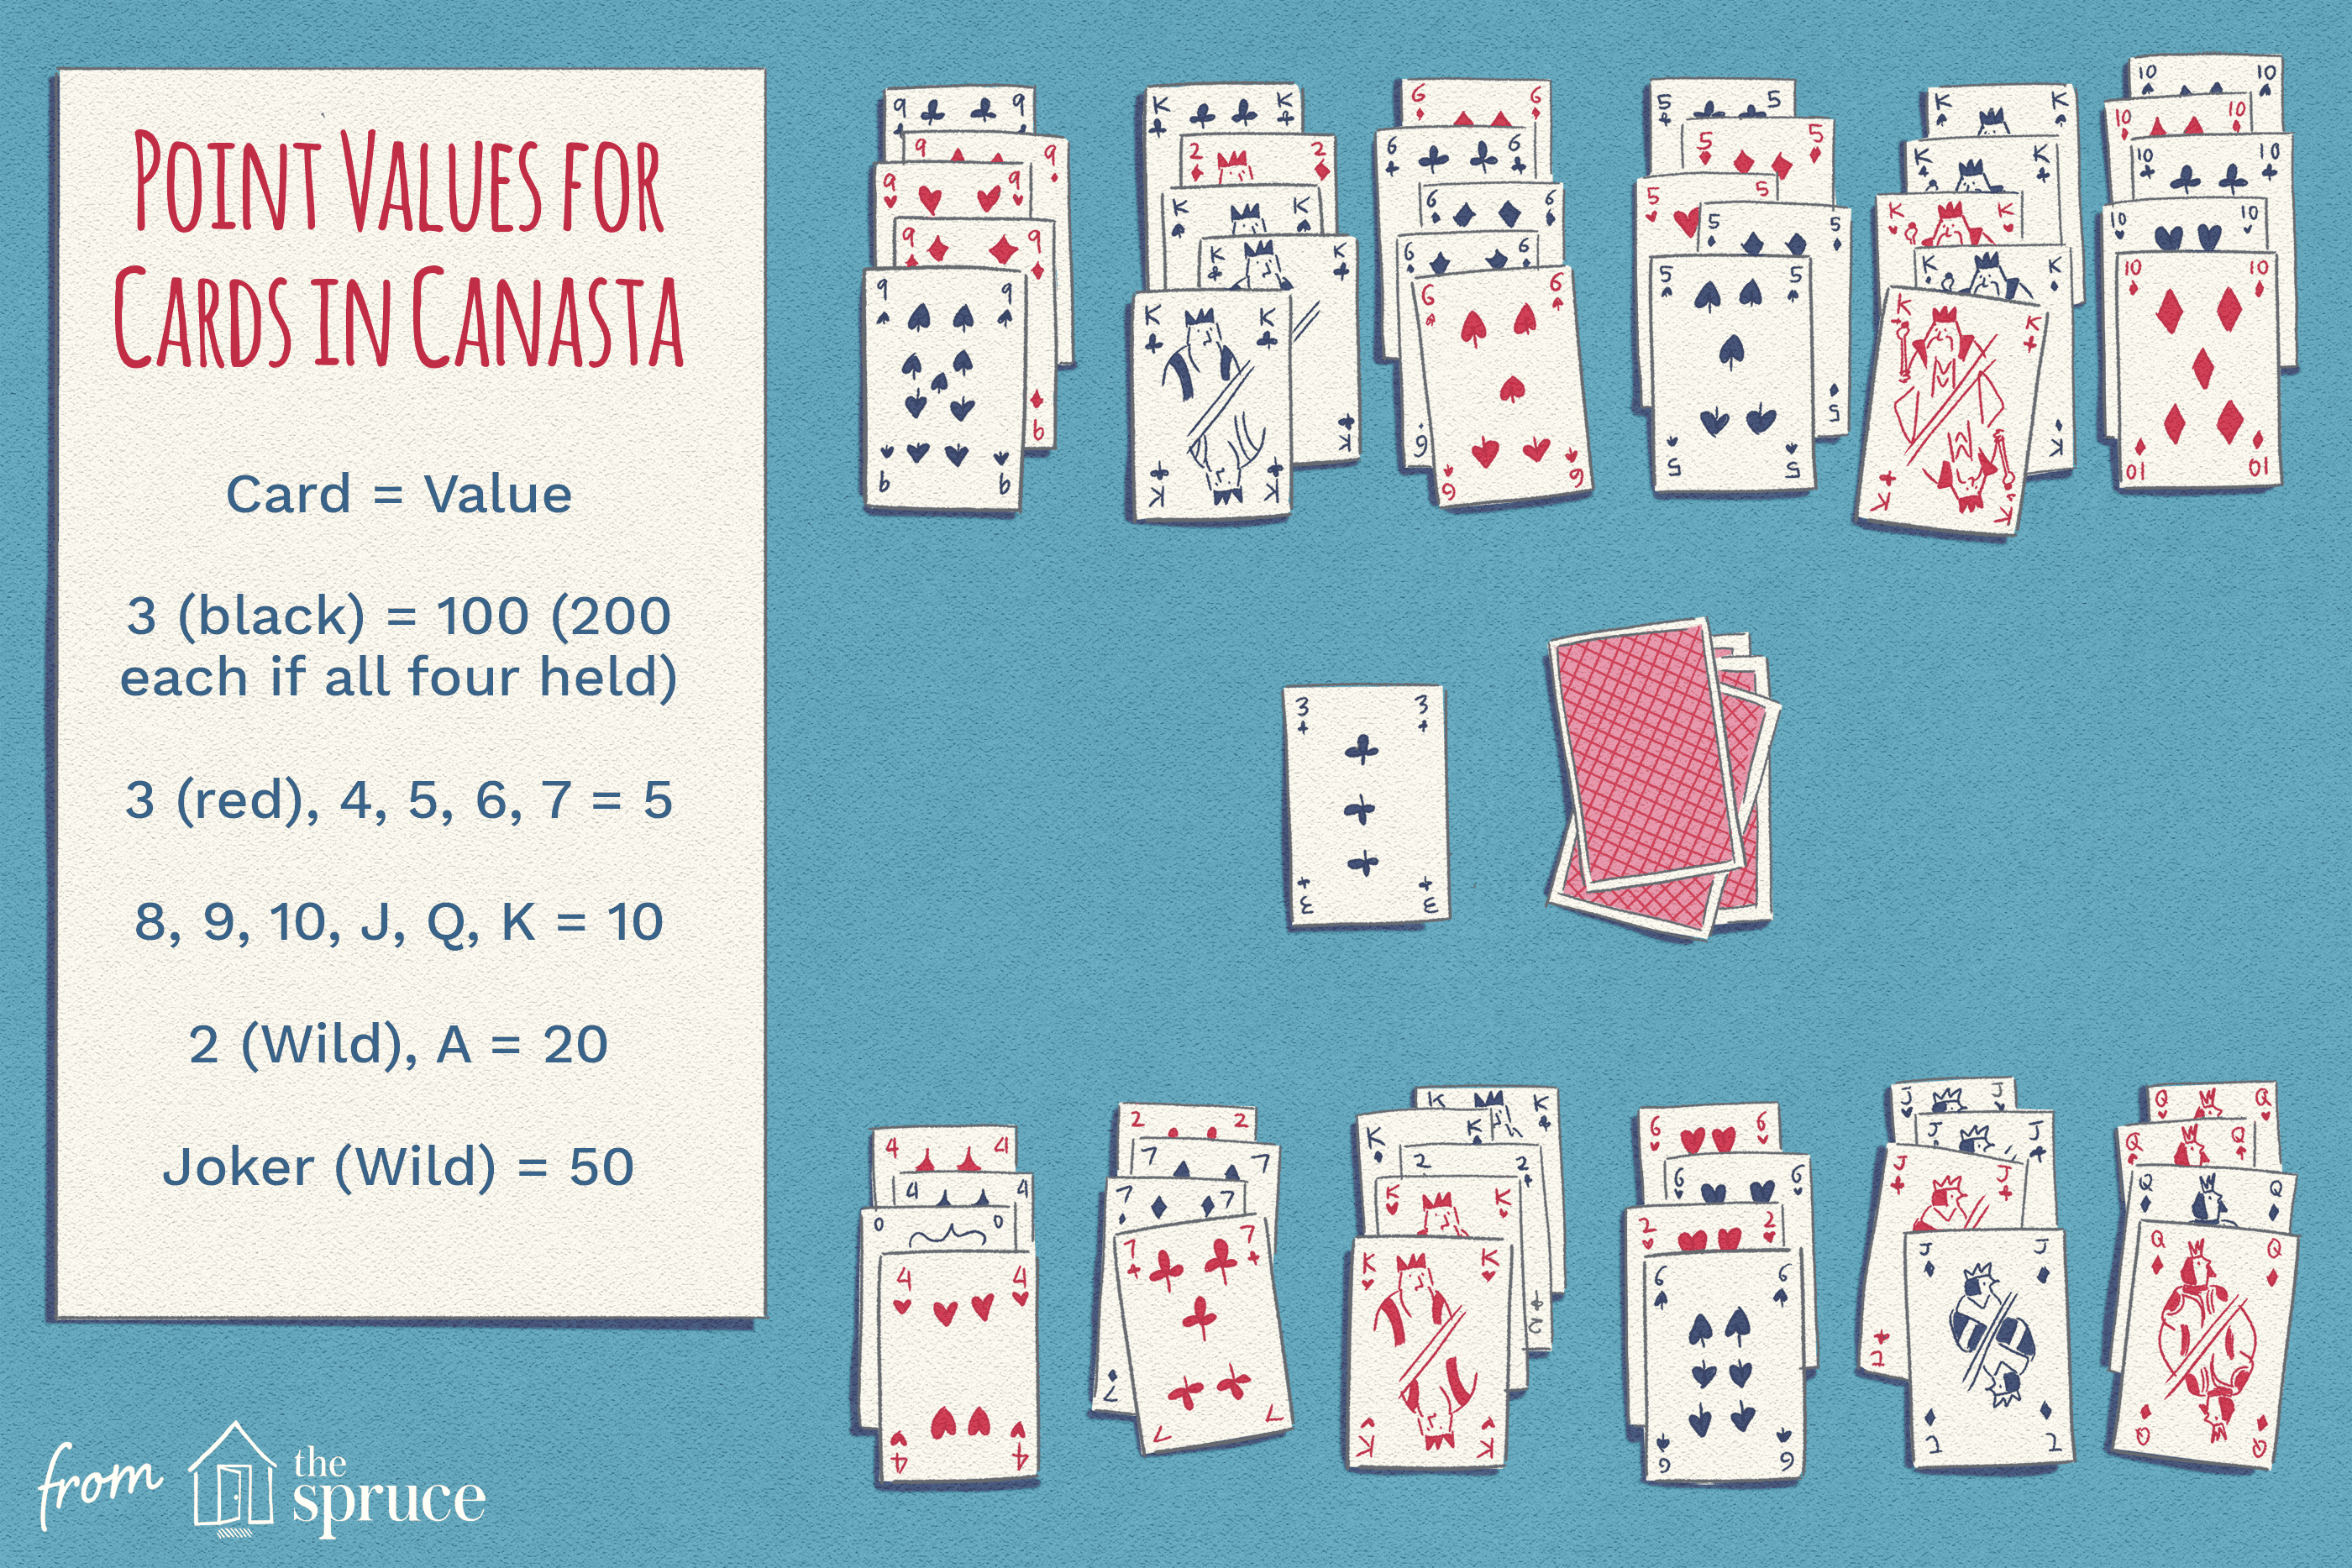 rules of canasta card game